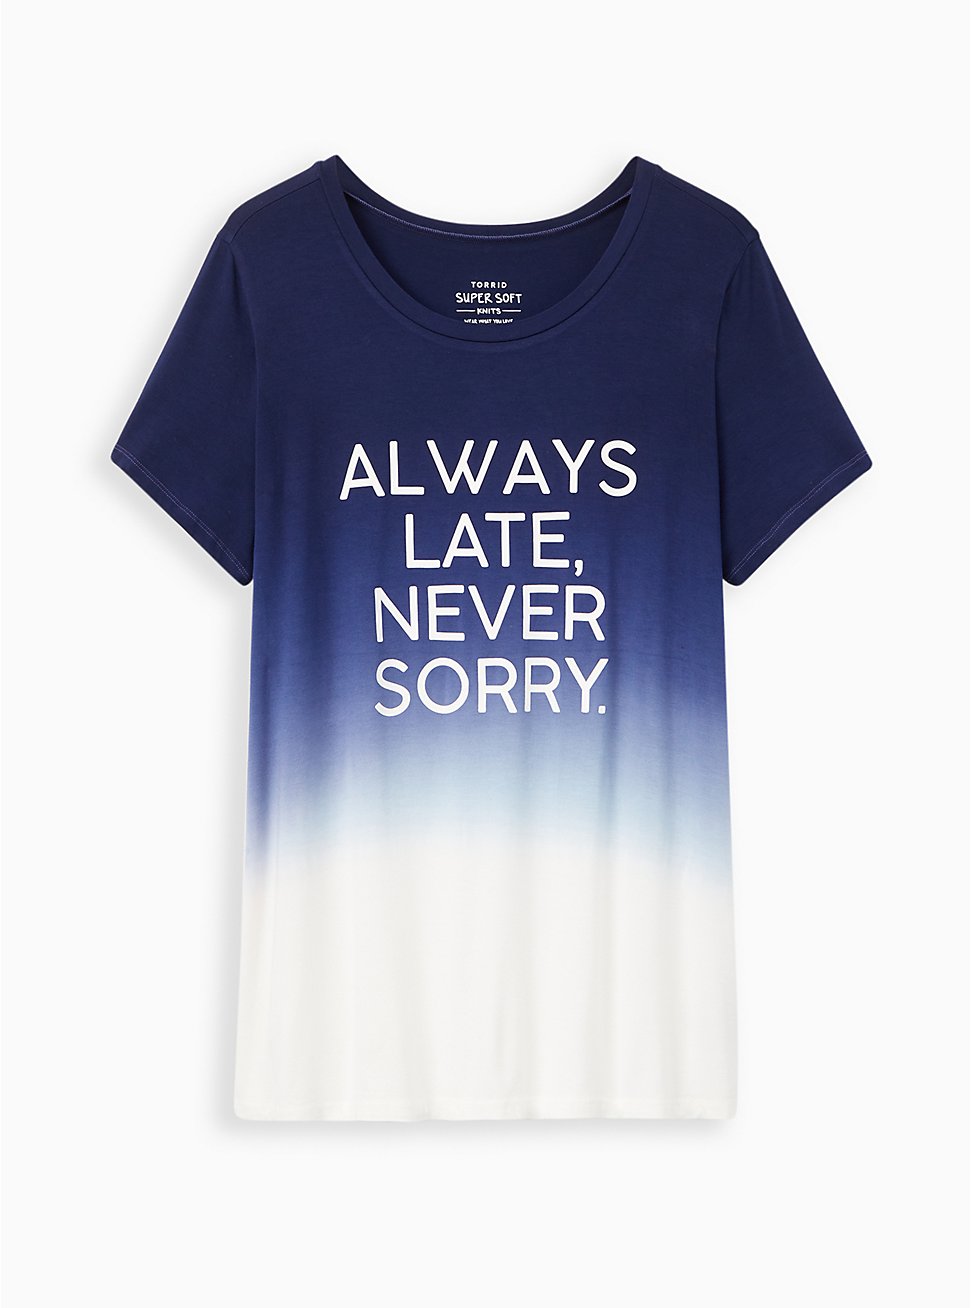 Plus Size Perfect Tee - Super Soft Dip Dye Always Late Navy, PEACOAT, hi-res